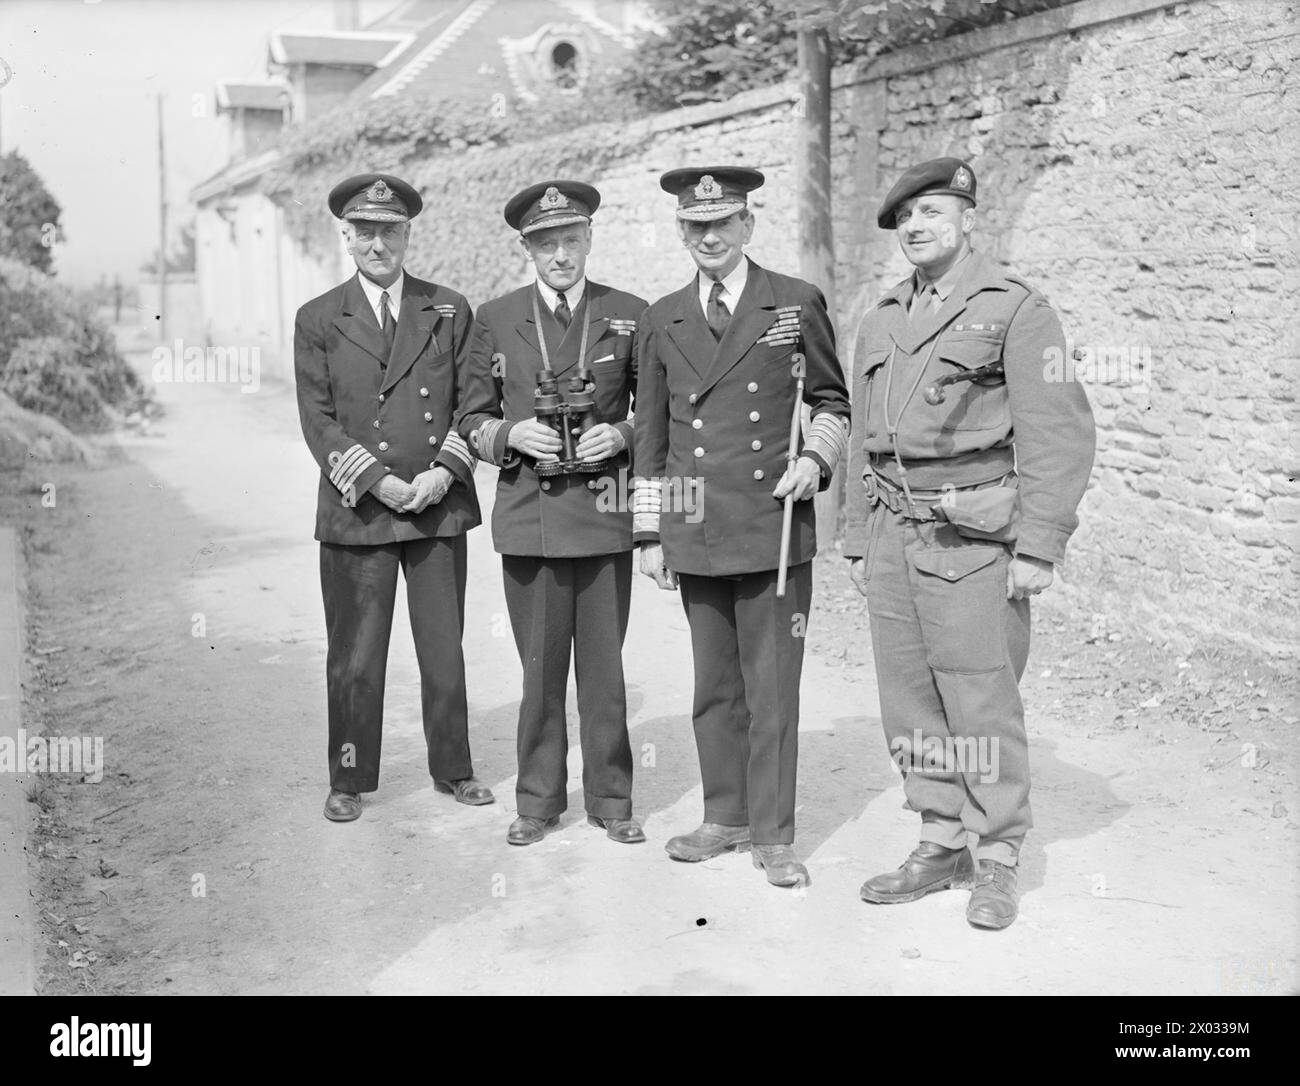 ADMIRAL LORD KEYES IN FRANCE. 6 JULY 1944, ARROMANCHES, NORMANDY. - Left to right: Capt H S M Harrison Wallace, DSO, RN, Captain H Hickling, DSO, RN, Capt H Hickling, DSO, RN, NOIC Arromanches, Admiral Lord Keyes, and Major J P Kelly, DSM, RM Stock Photo